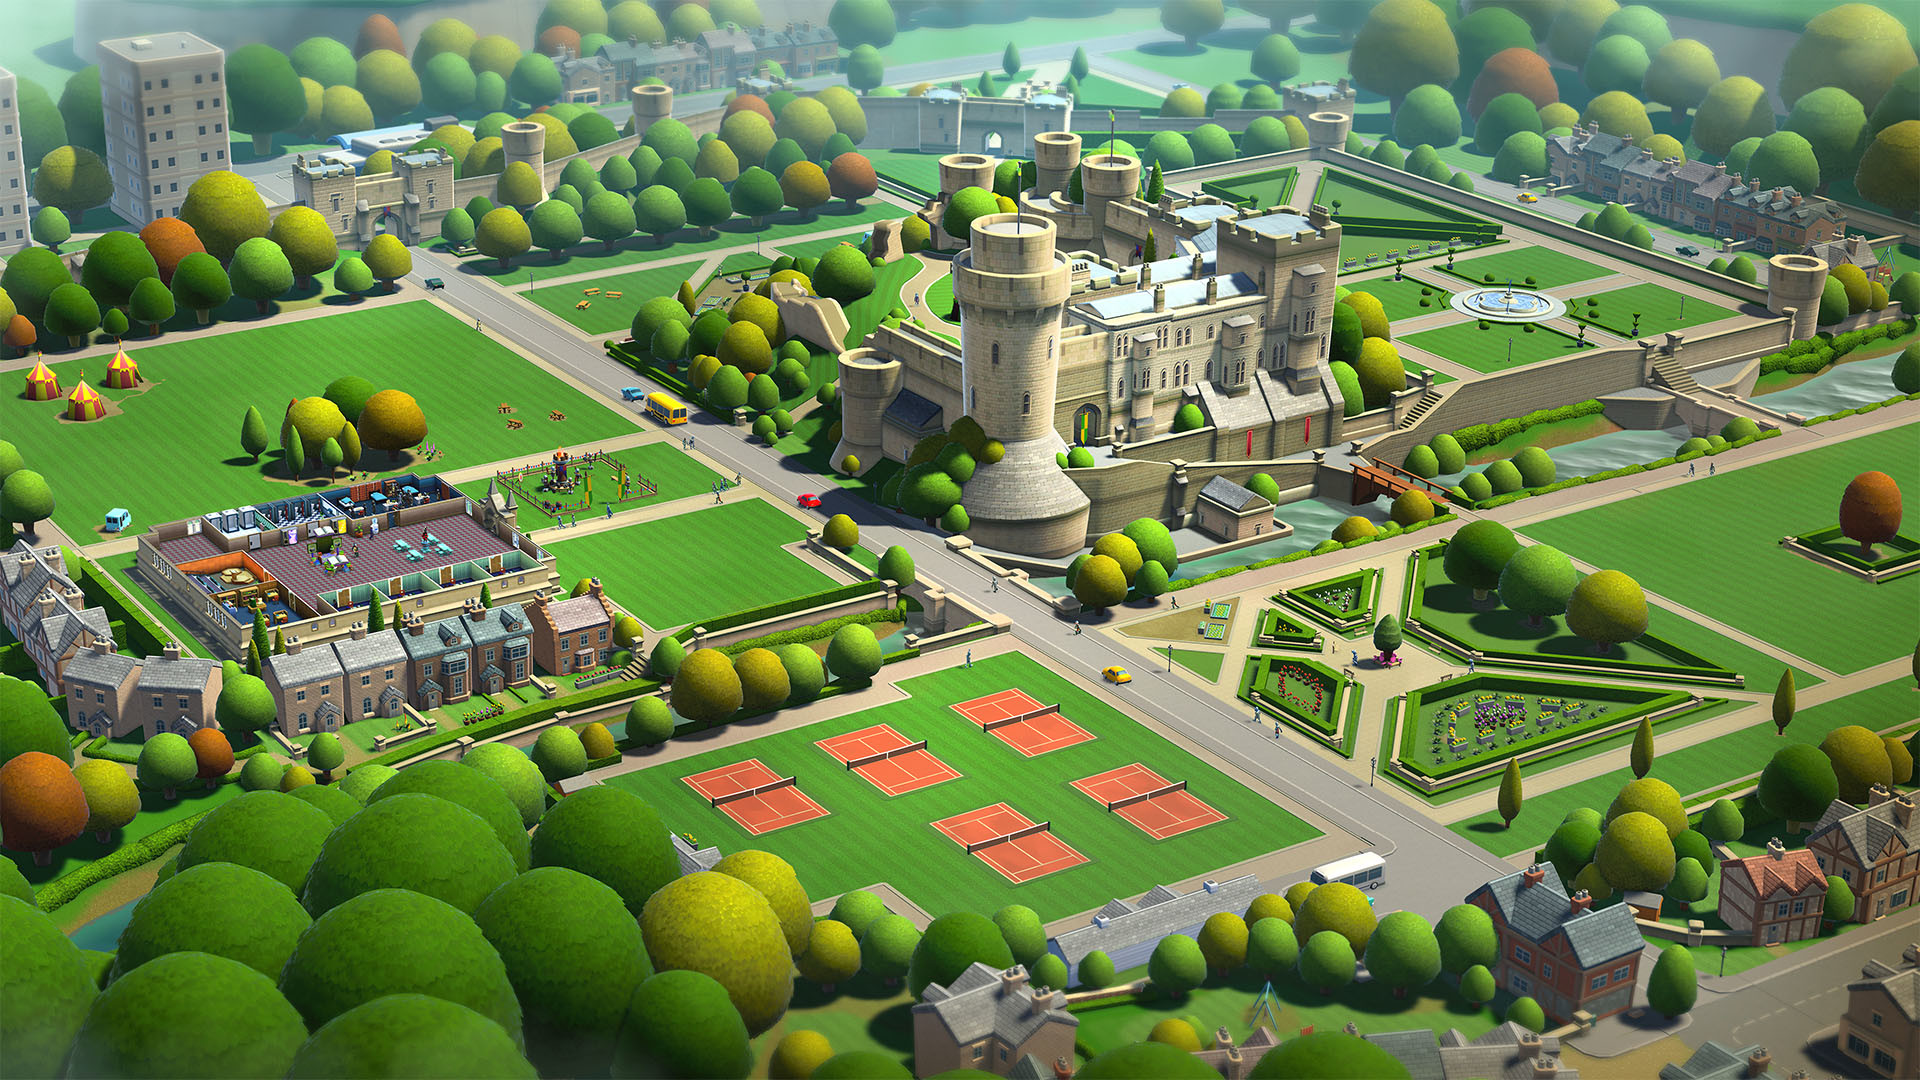 Where to find the Dorms in Royale High Campus 3? - Pro Game Guides